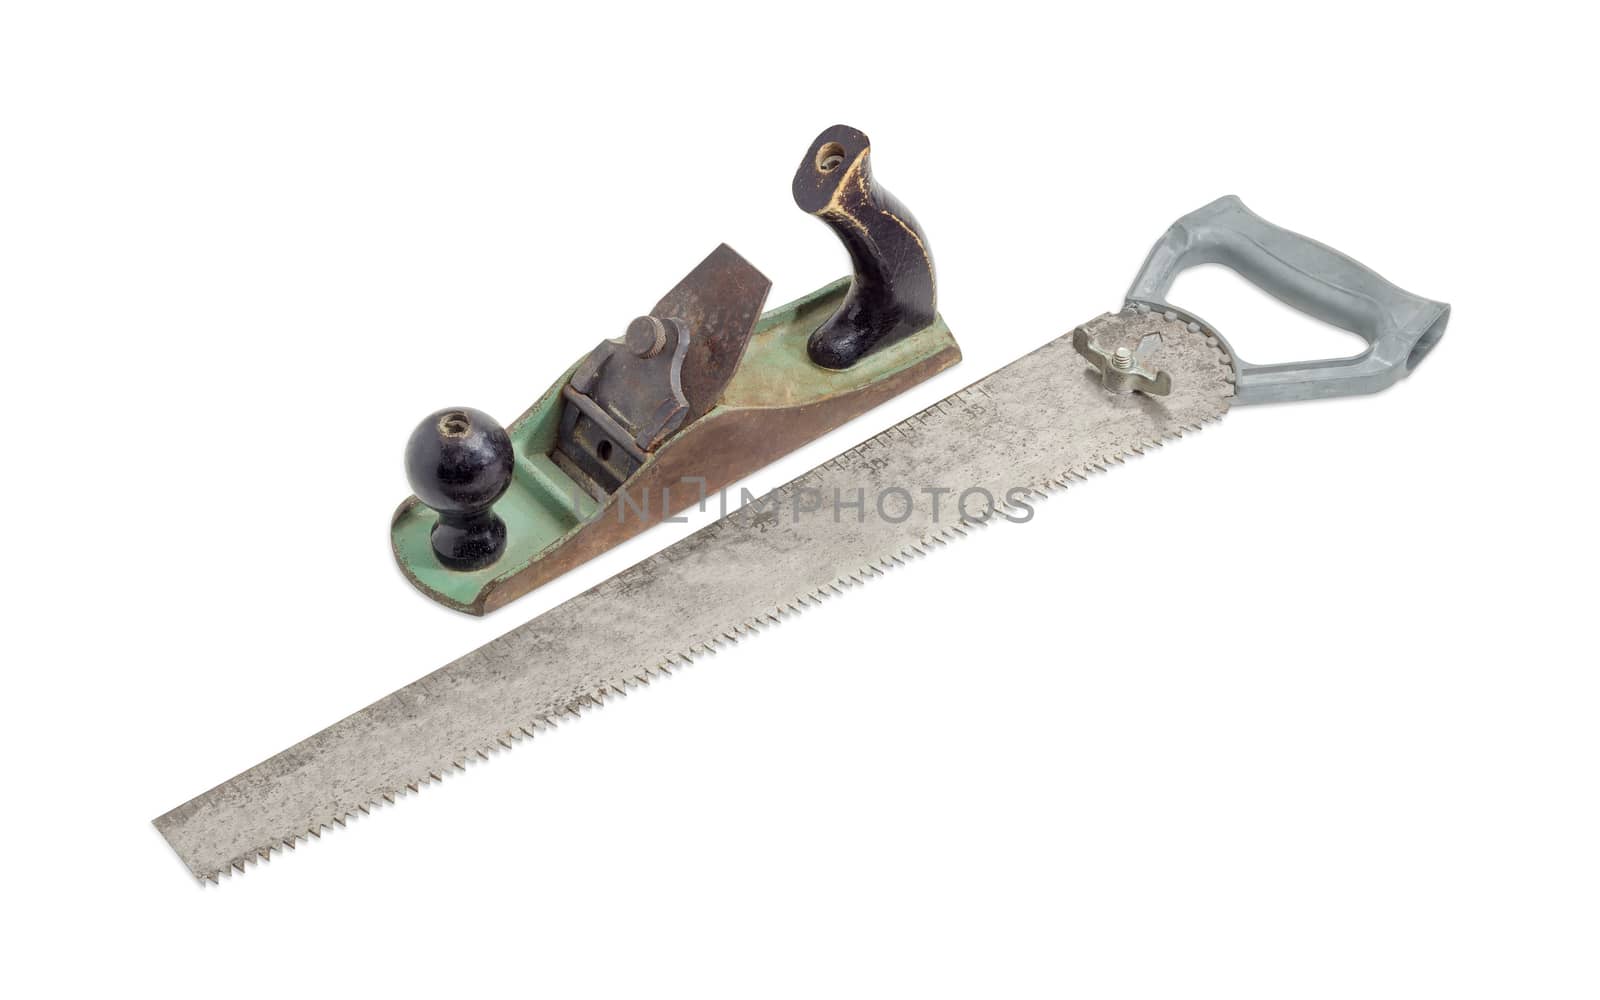 Old hand plane and crosscut hand saw by anmbph